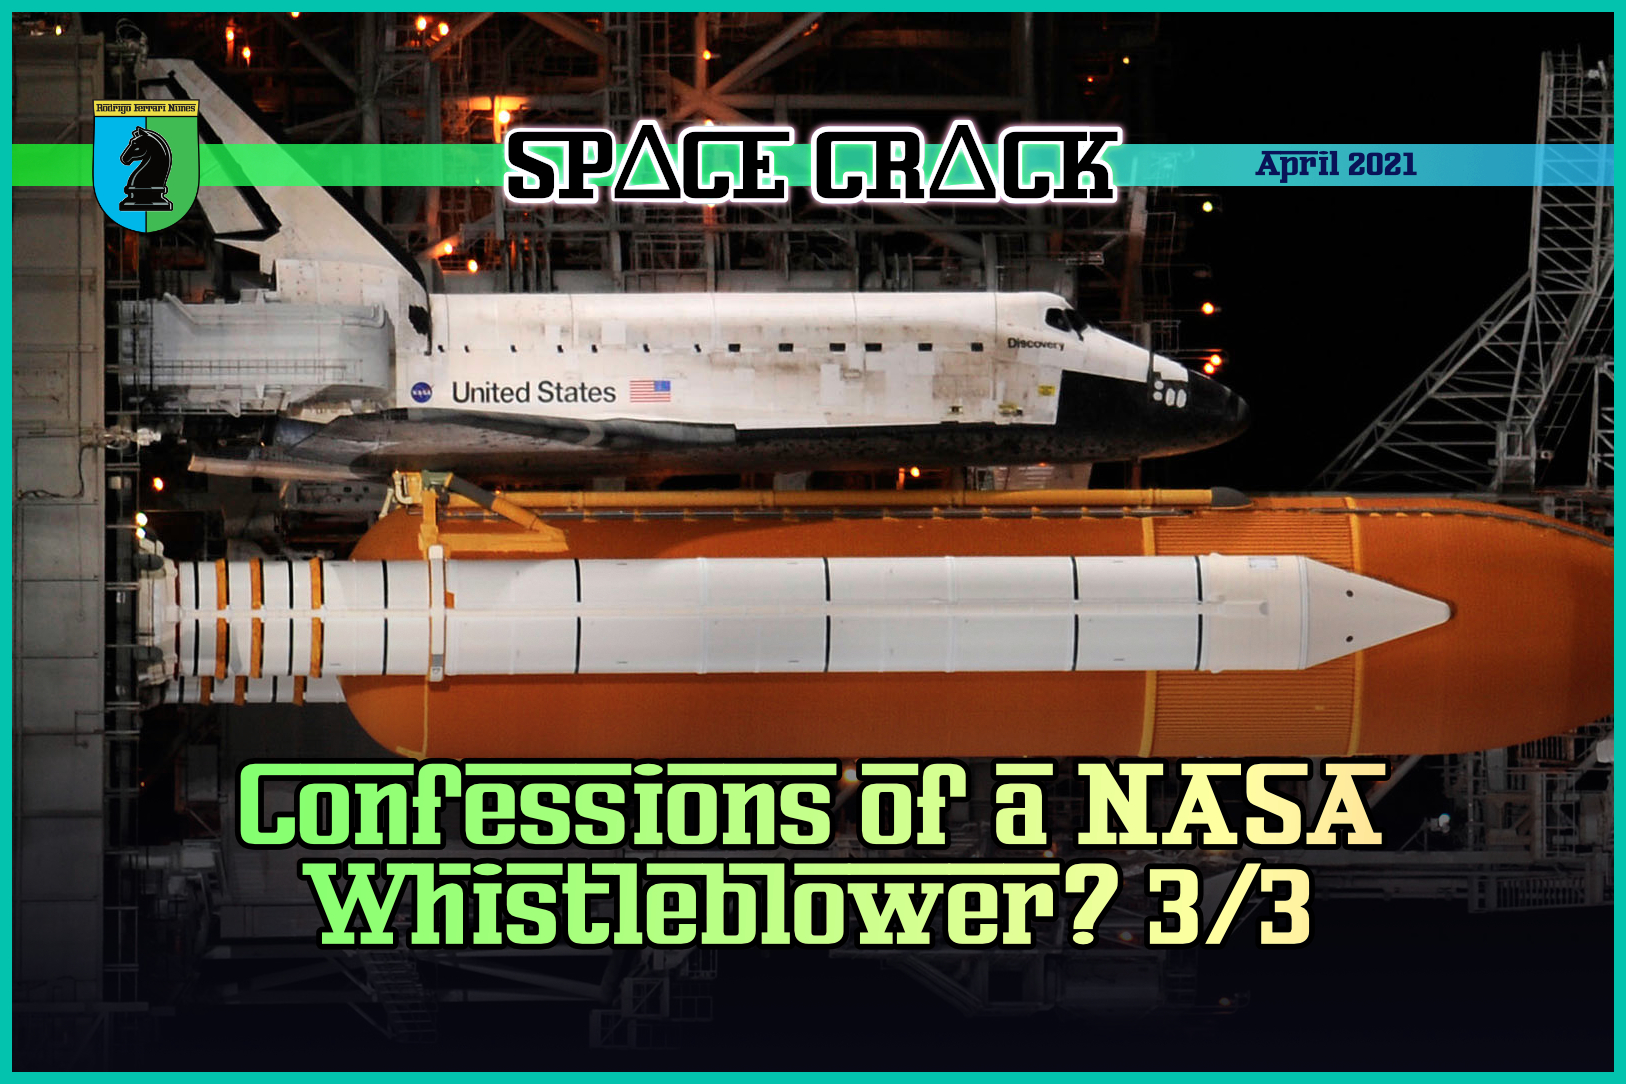 CONFESSIONS OF A NASA WHISTLEBLOWER? PART 3/3